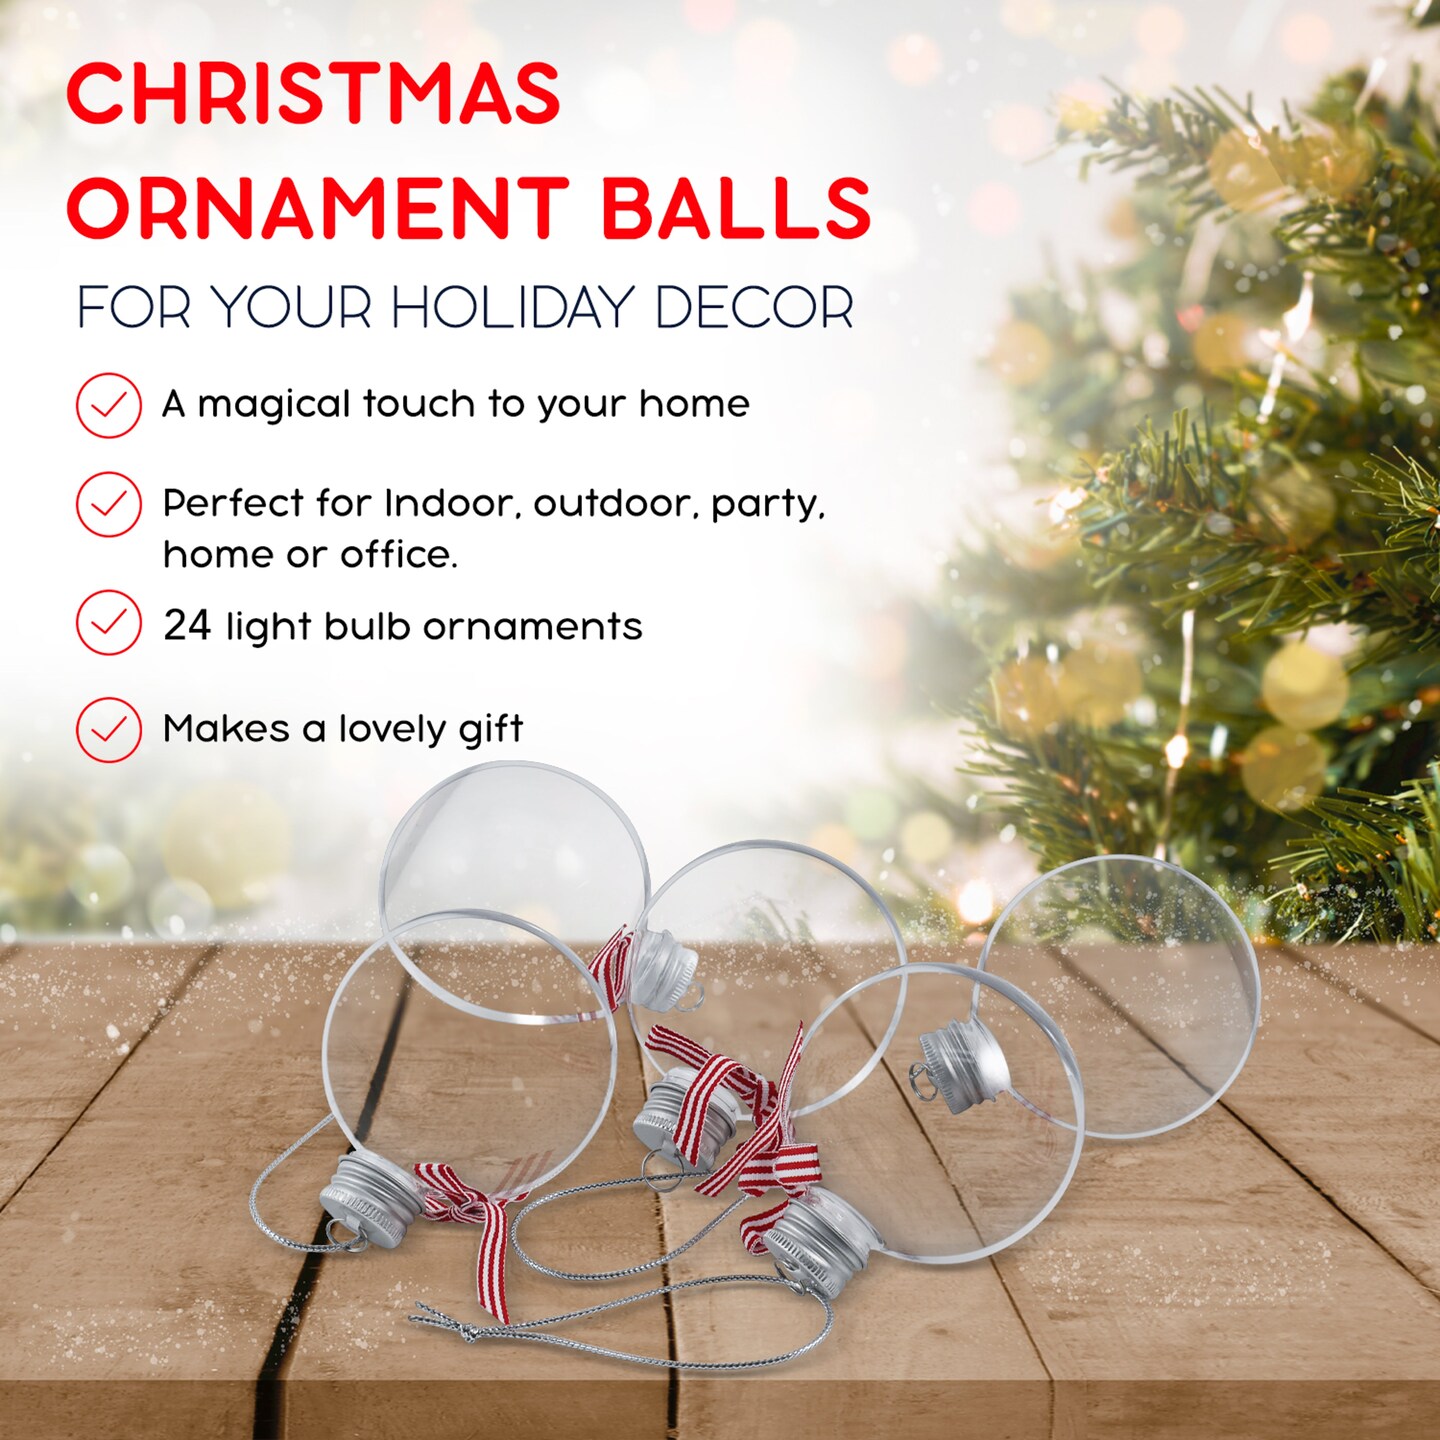 RN&#x27;D Toys Clear Fillable Ornaments - Shatterproof Transparent Plastic Craft Ornament Balls Decorations with Red and White Ribbon for DIY Christmas Ball Sphere Ornament Set - Pack of 24